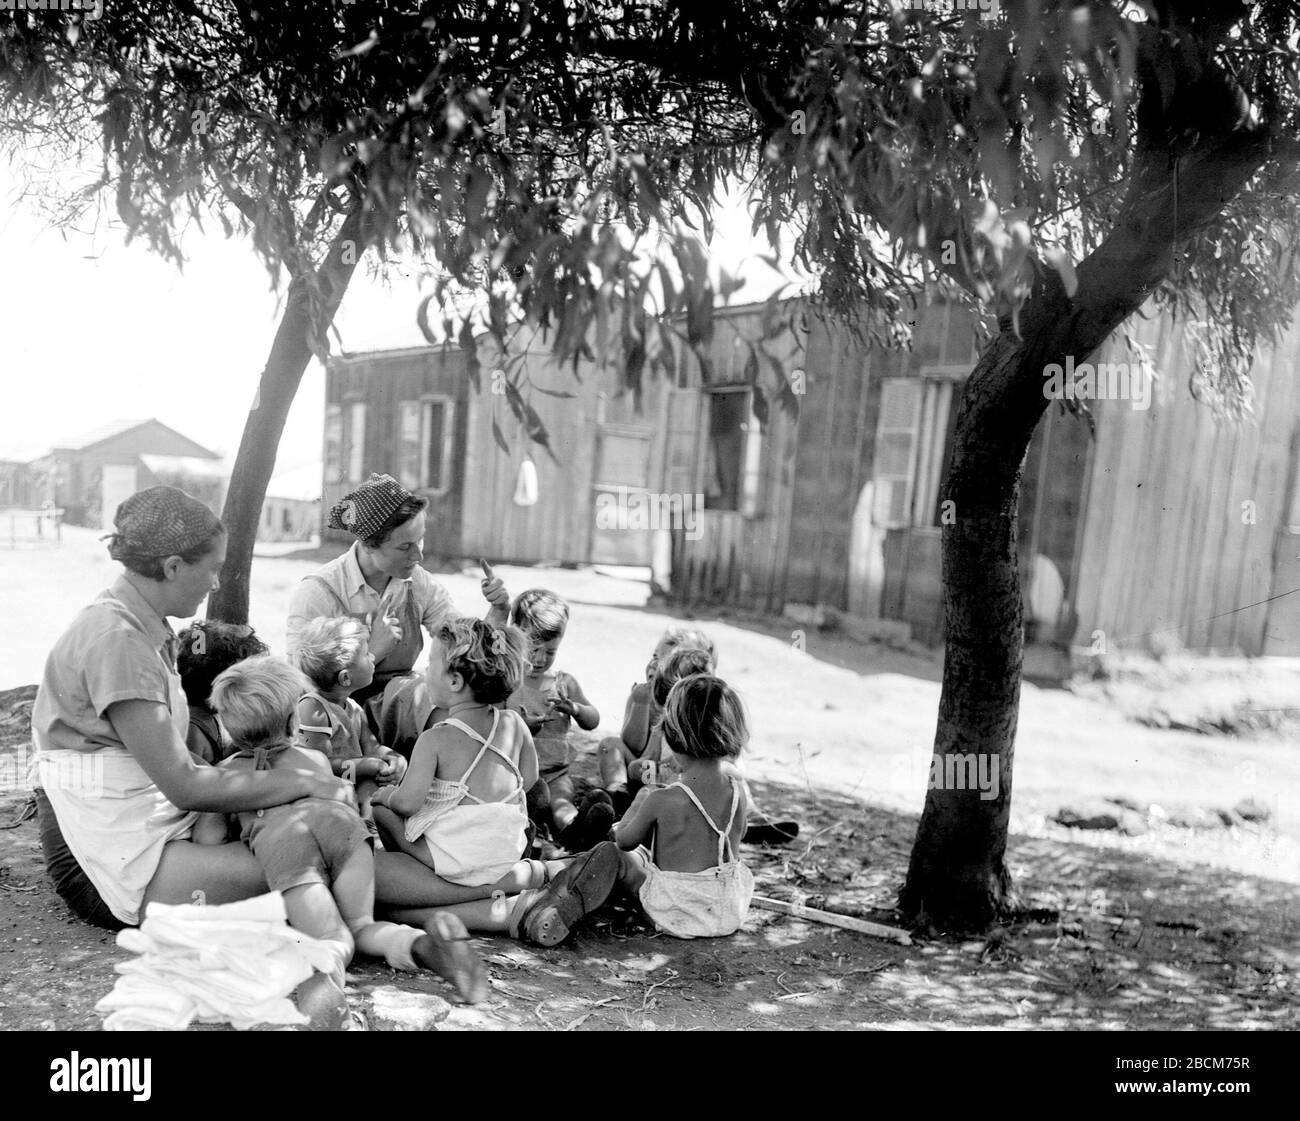 English The Children S Nursery At Kibbutz Givat Haim I U I O U I O U E Ss O E I I E O O O U 01 05 1939 This Is Available From National Photo Collection Of Israel Photography Dept Goverment Press Office Link